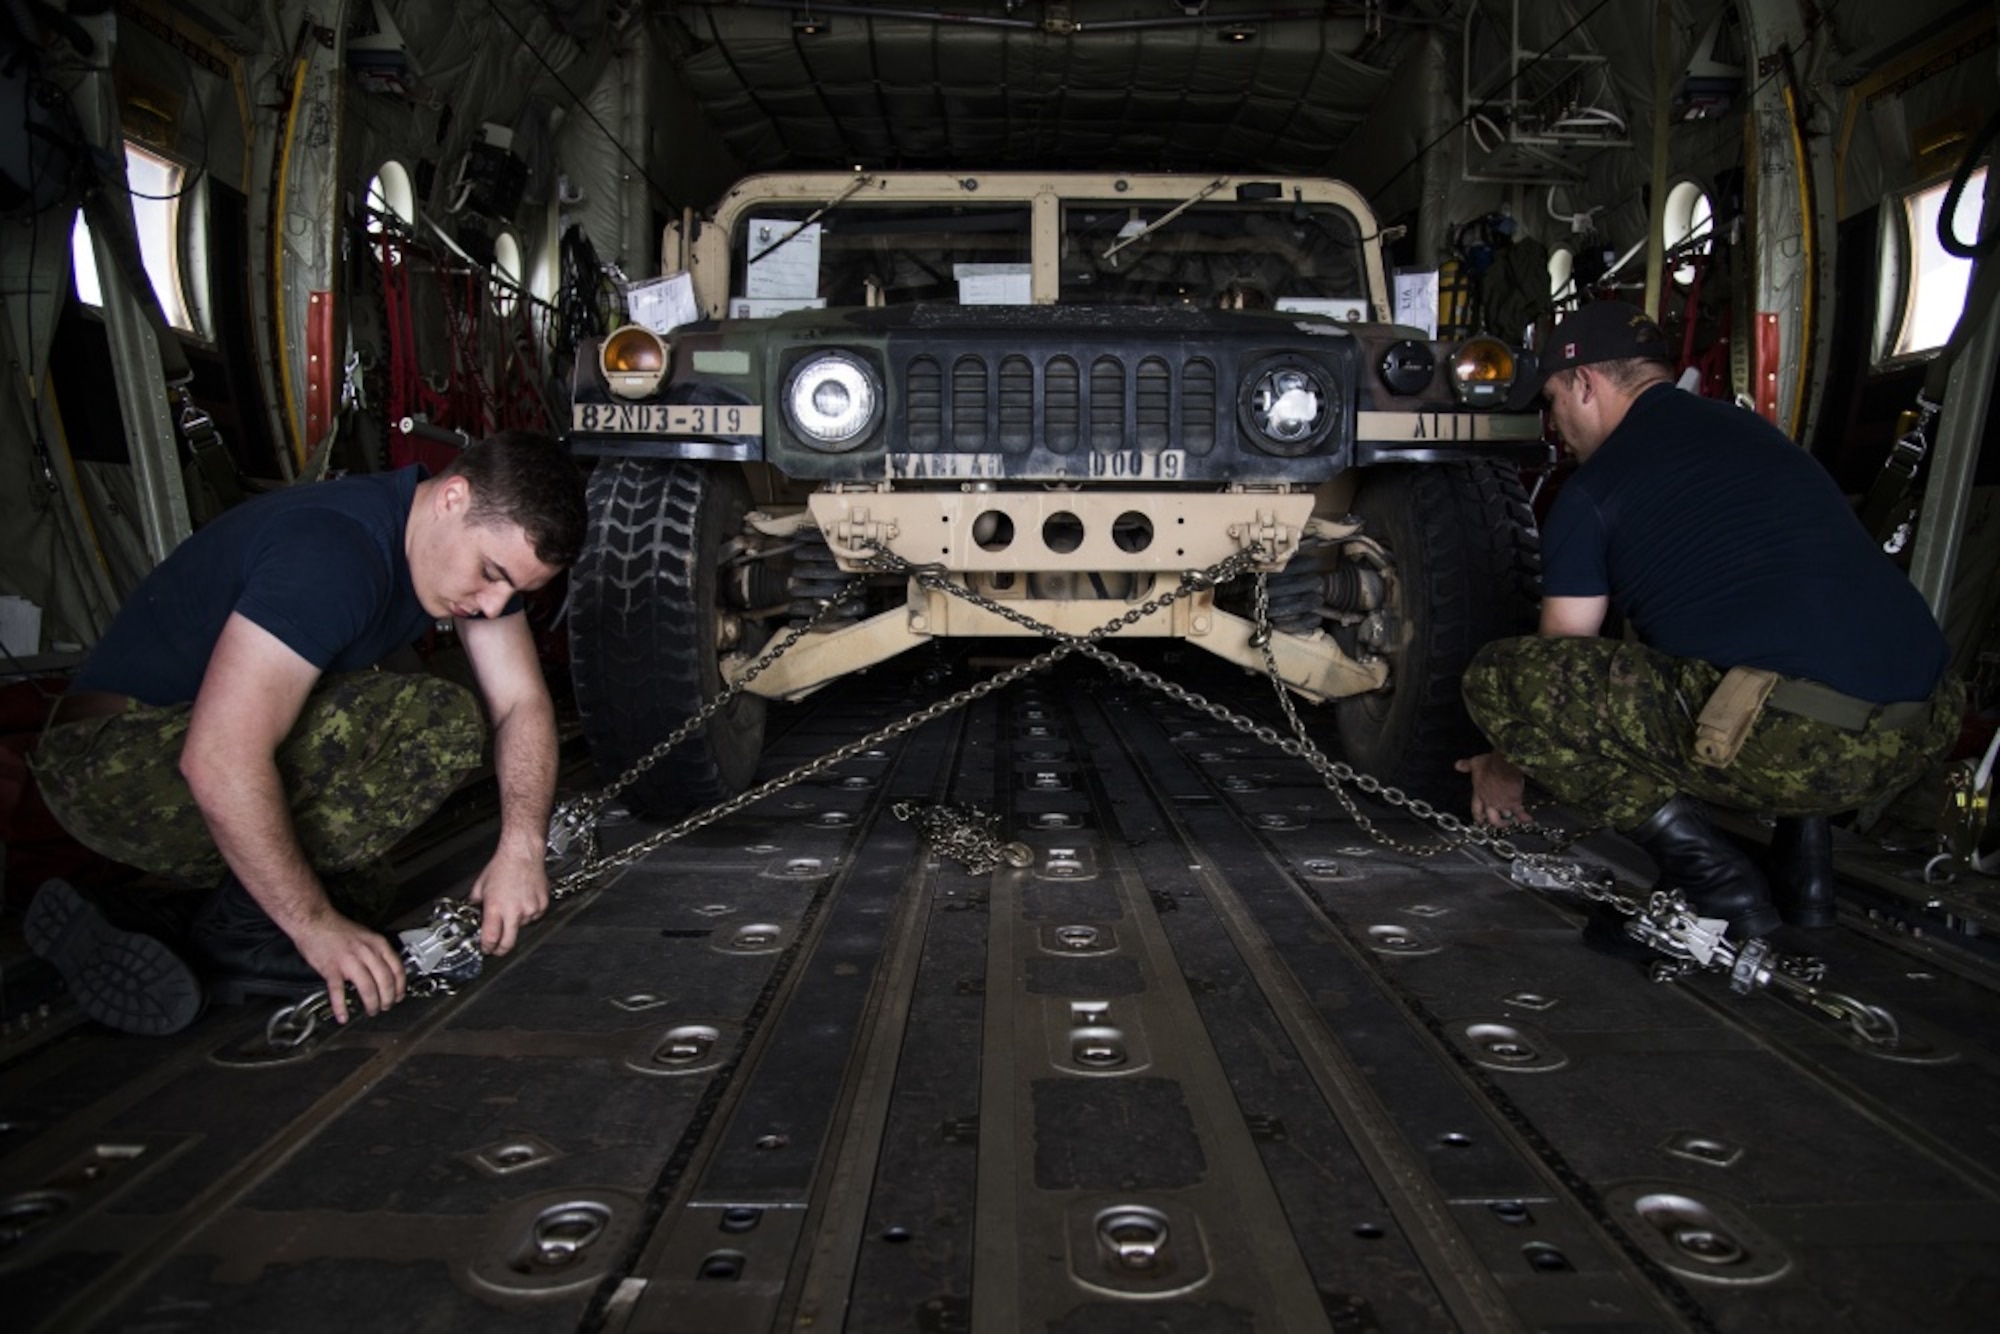 Royal Canadian Air Force CC-130J Super Hercules crew members, 436 Transport Squadron, assigned to 8 Wing Trenton, Trenton, Ontario, Canada, chain down a U.S. Army humvee onto the cargo bay in preparation for the Selah Creek air base opening training scenario during Mobility Guardian 2019, Fairchild Air Force Base, Washington, Sept. 14, 2019. Exercise Mobility Guardian is Air Mobility Command's premier, large scale mobility exercise. Through robust and relevant training, Mobility Guardian improves the readiness and capabilities of Mobility Airmen to deliver rapid global mobility and builds a more lethal and ready Air Force. (U.S. Air Force photo by Tech. Sgt. Larry E. Reid Jr.)